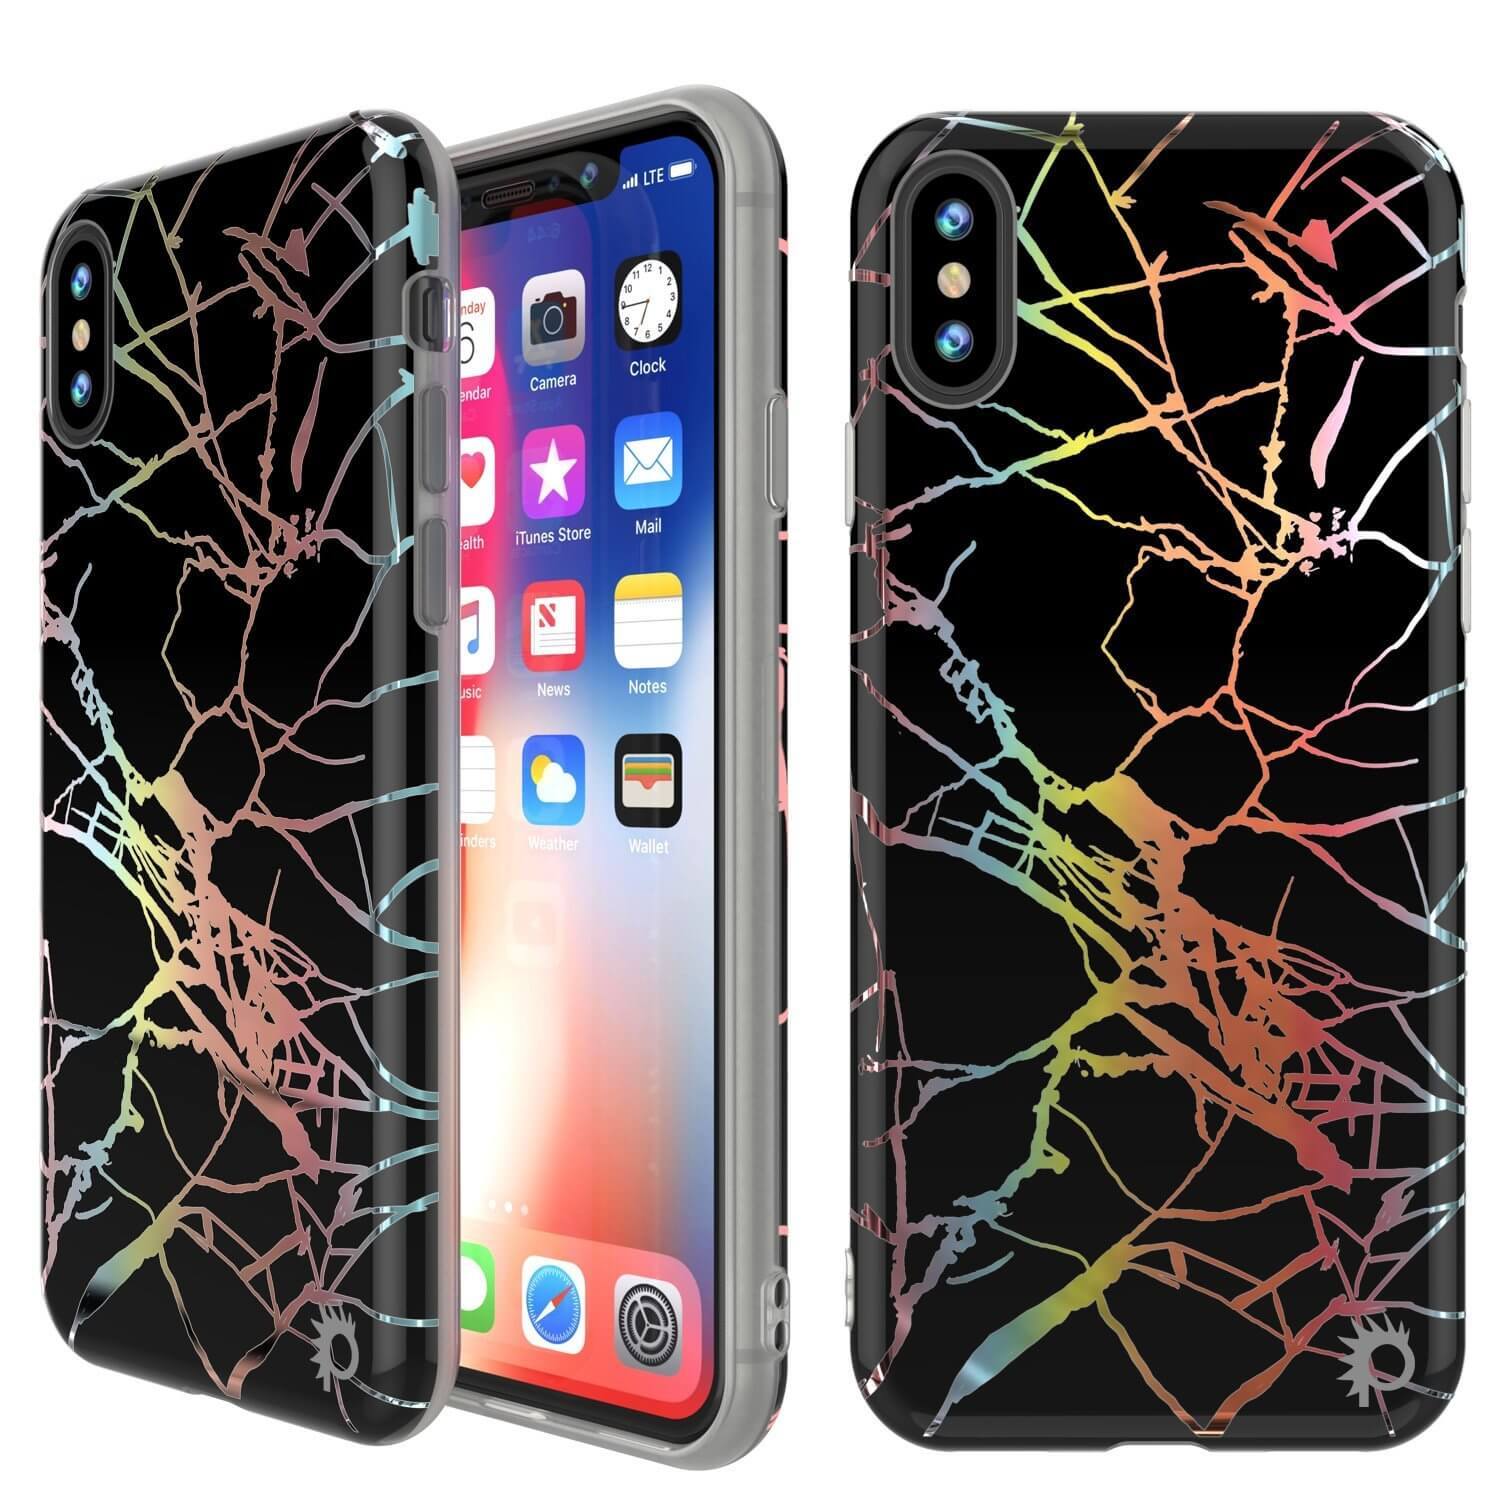 Punkcase iPhone X Marble Case, Protective Full Body Cover W/9H Tempered Glass Screen Protector (Black Mirage)